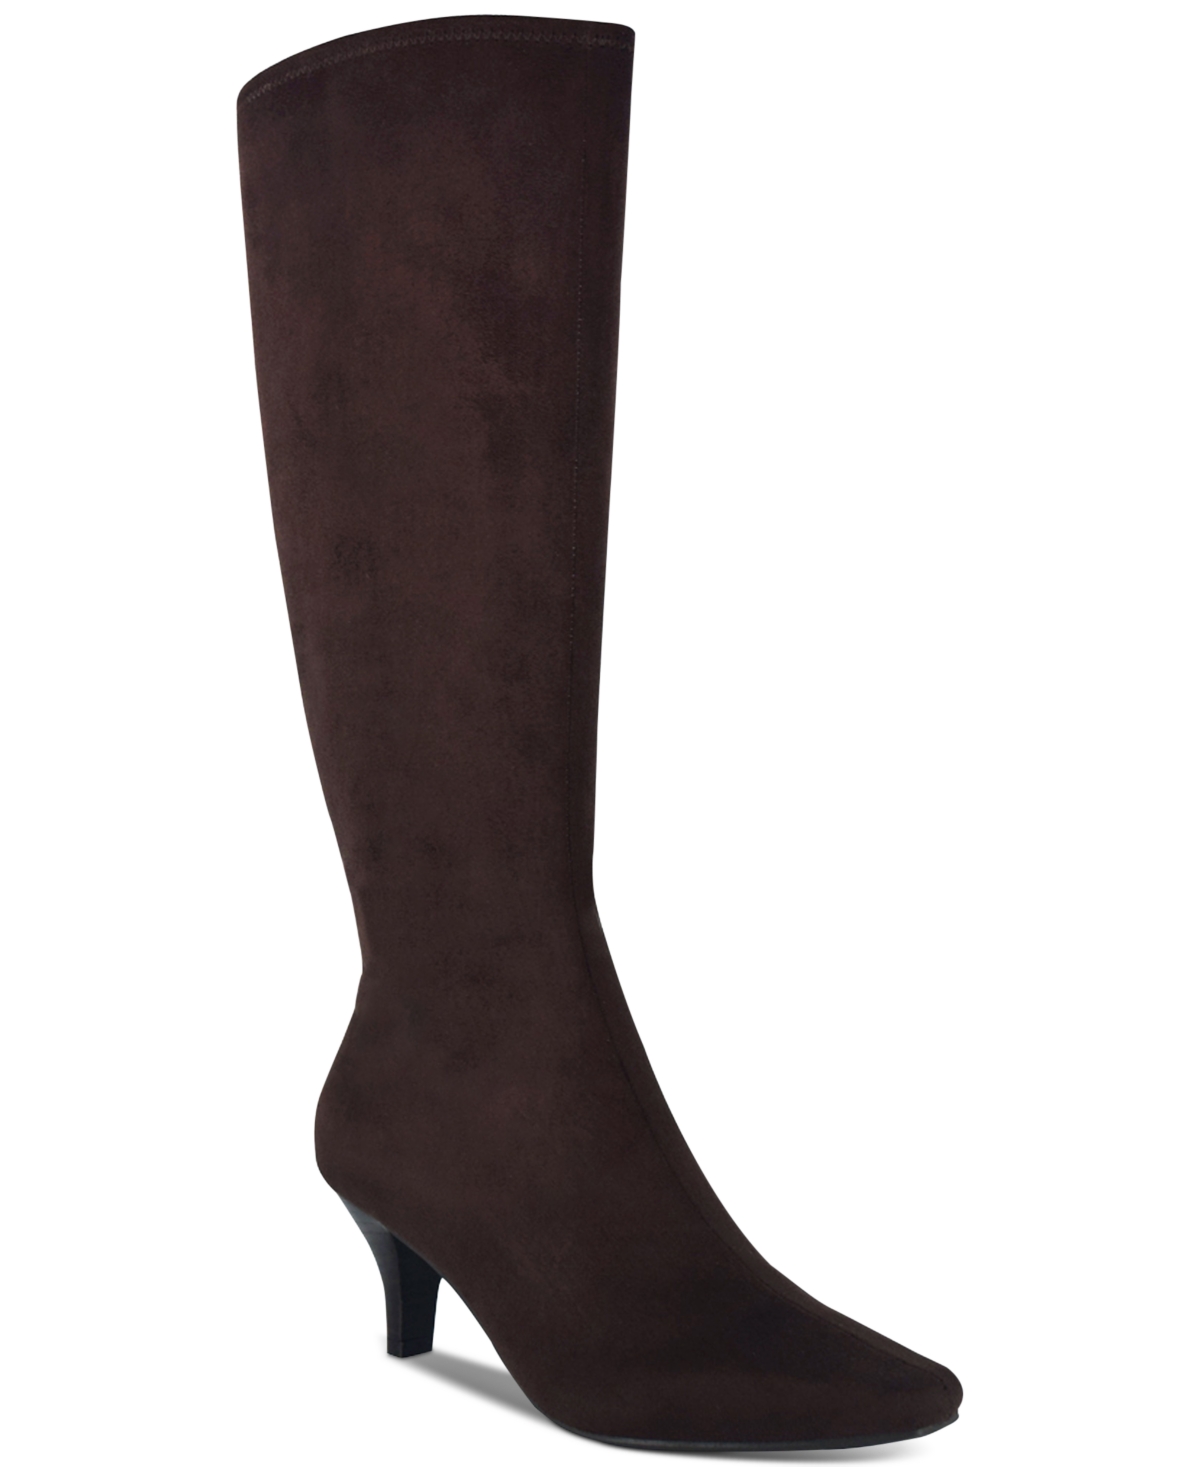 Women's Namora Knee High Dress Boots - Natural Multi- Faux Suede, Synthetic Pol